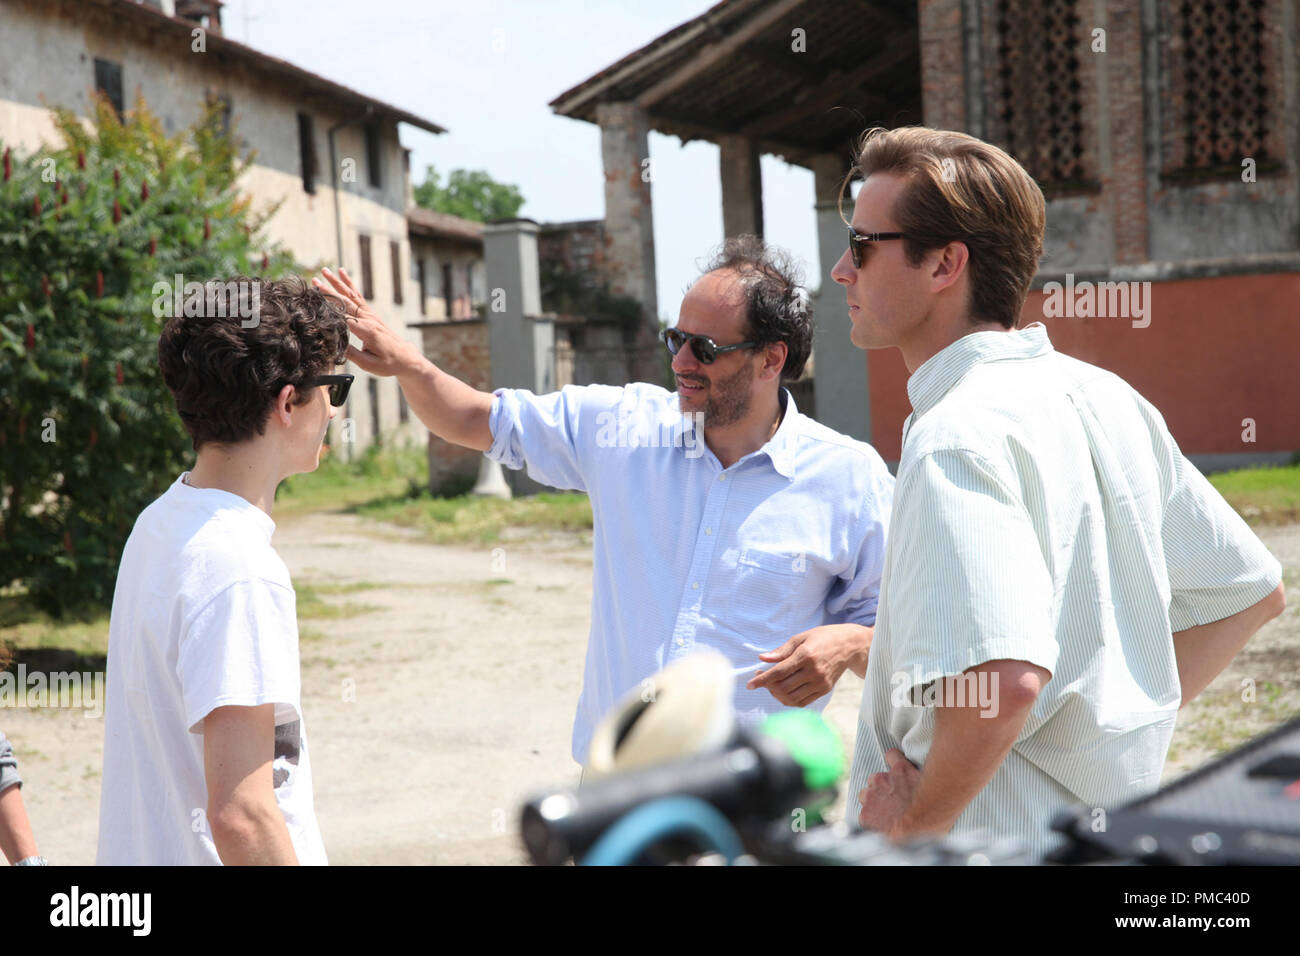 Director Luca Guadagnino Armie Hammer And Timothee Chalamet Call Me By Your Name 17 Sony Pictures Classics Stock Photo Alamy